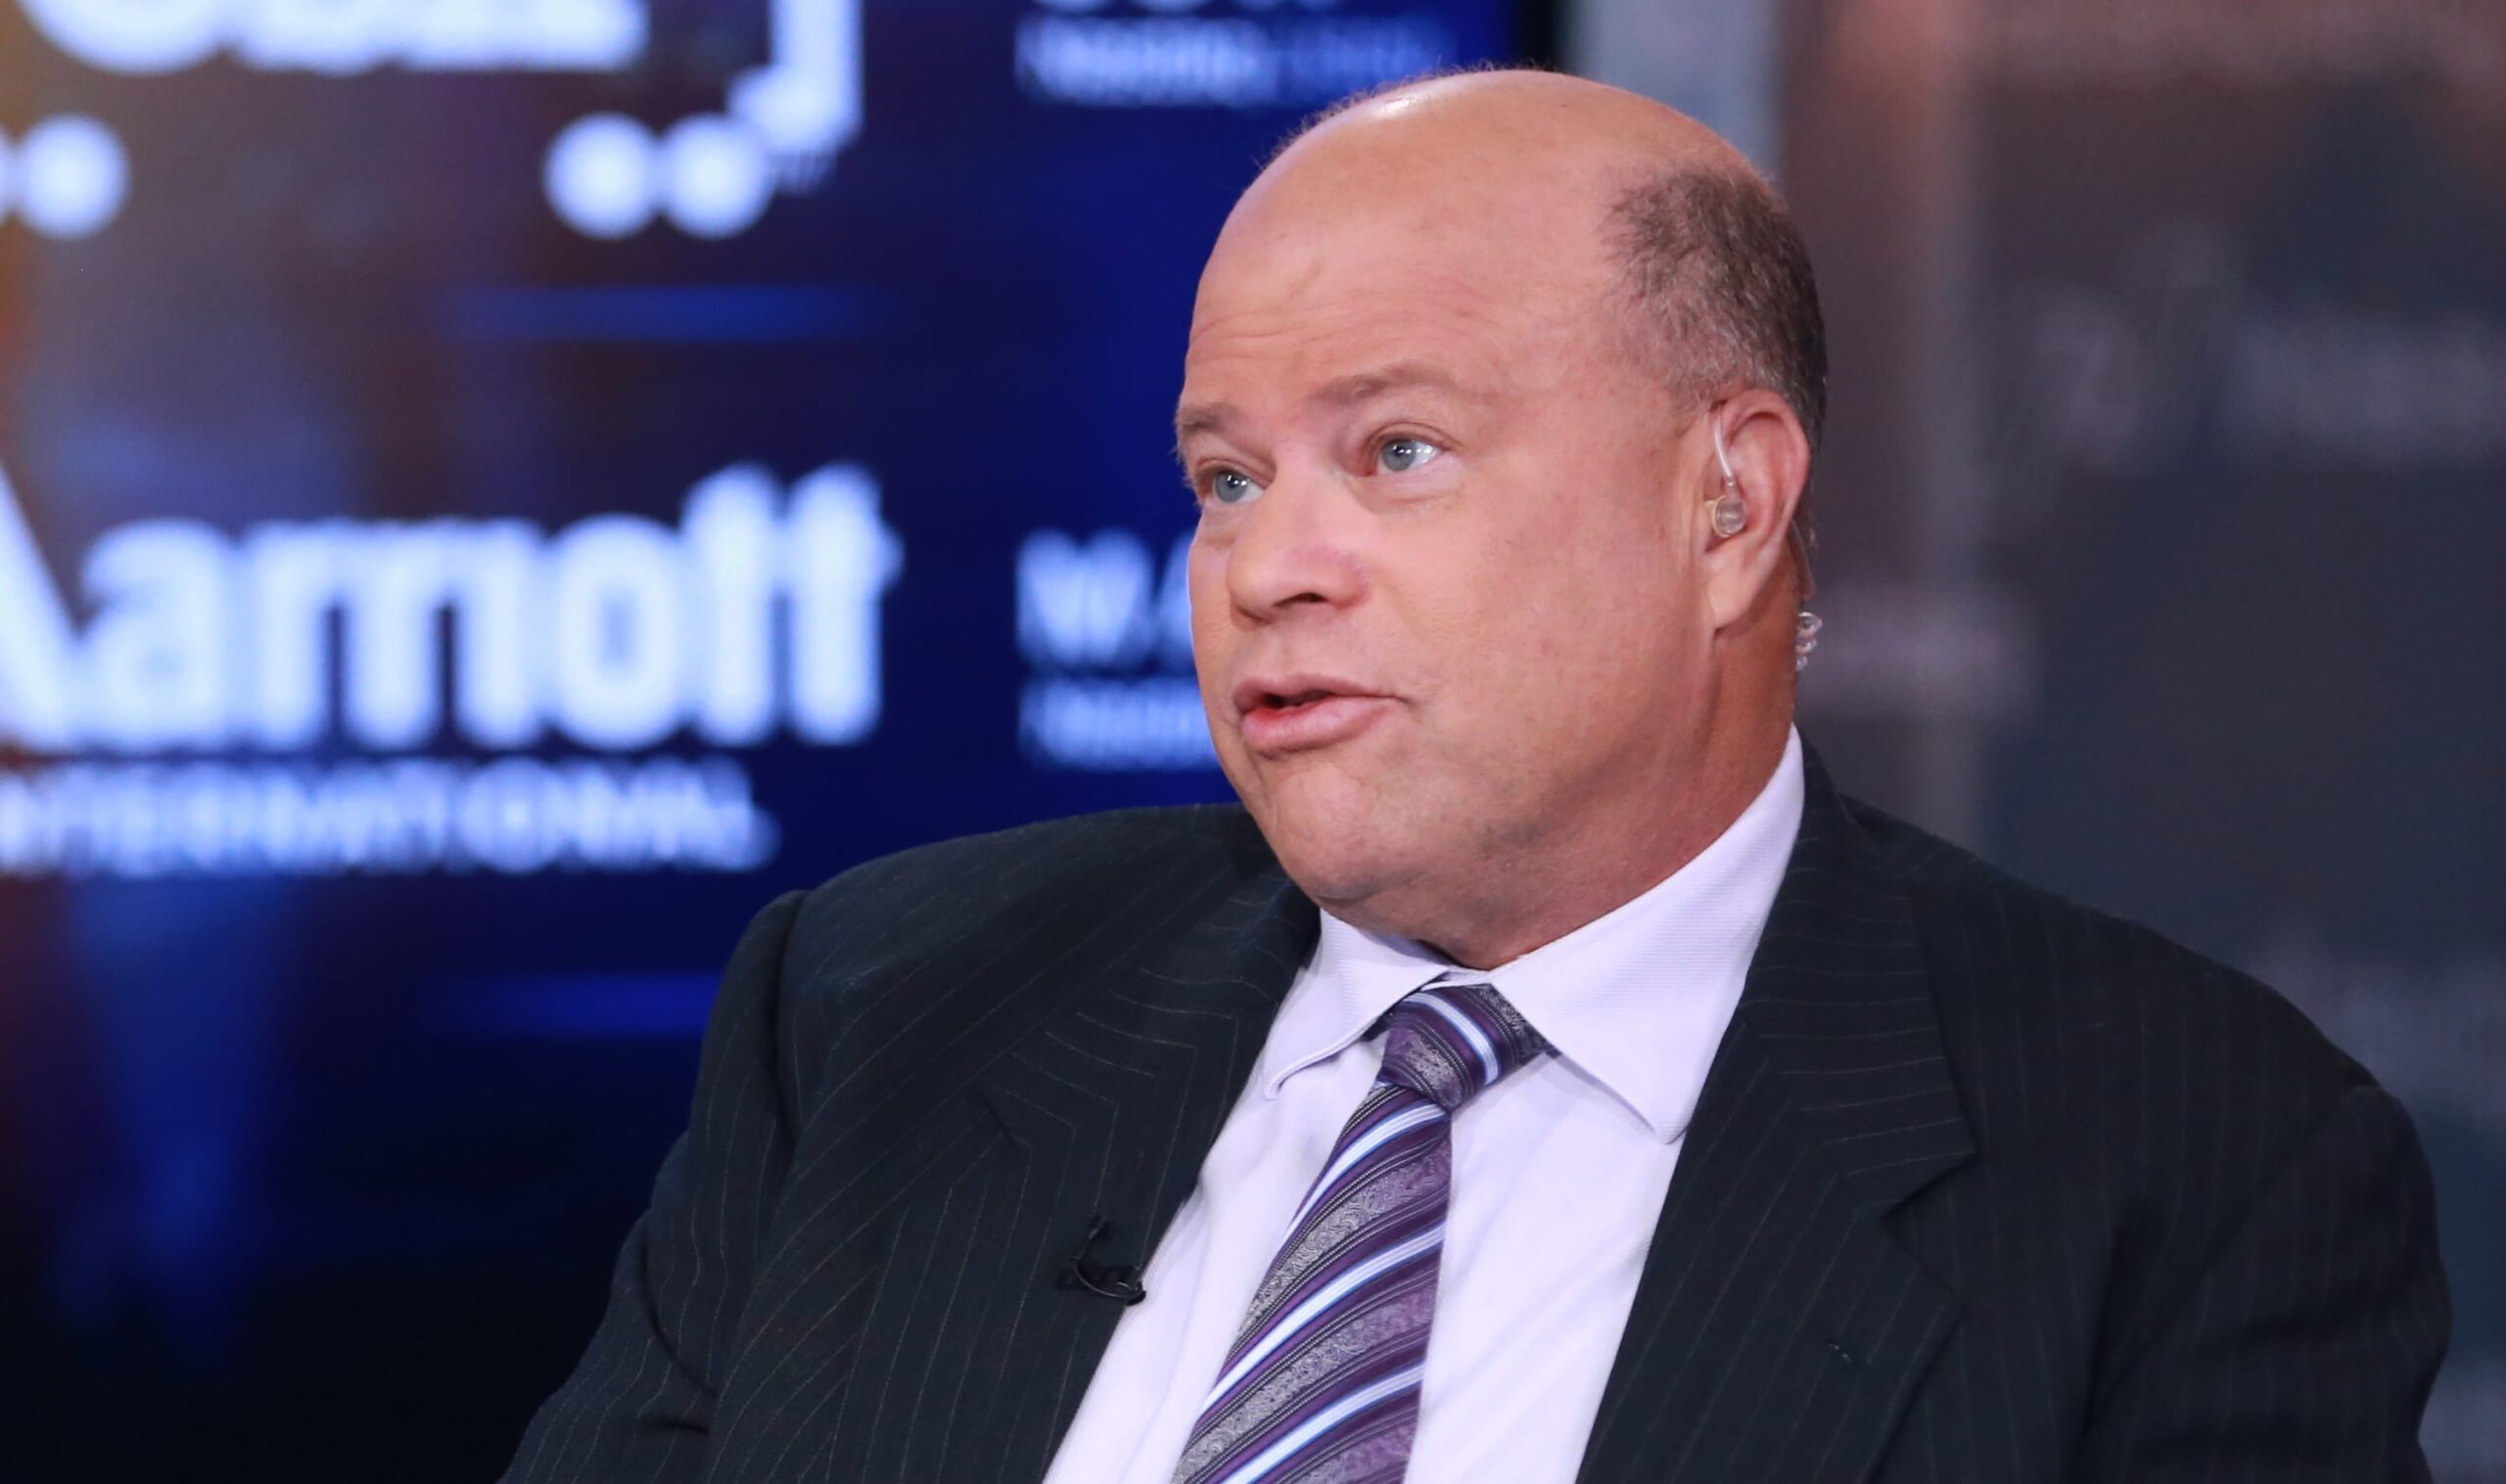 
David Tepper On Venture Capital: What You Need To Know Before Investing